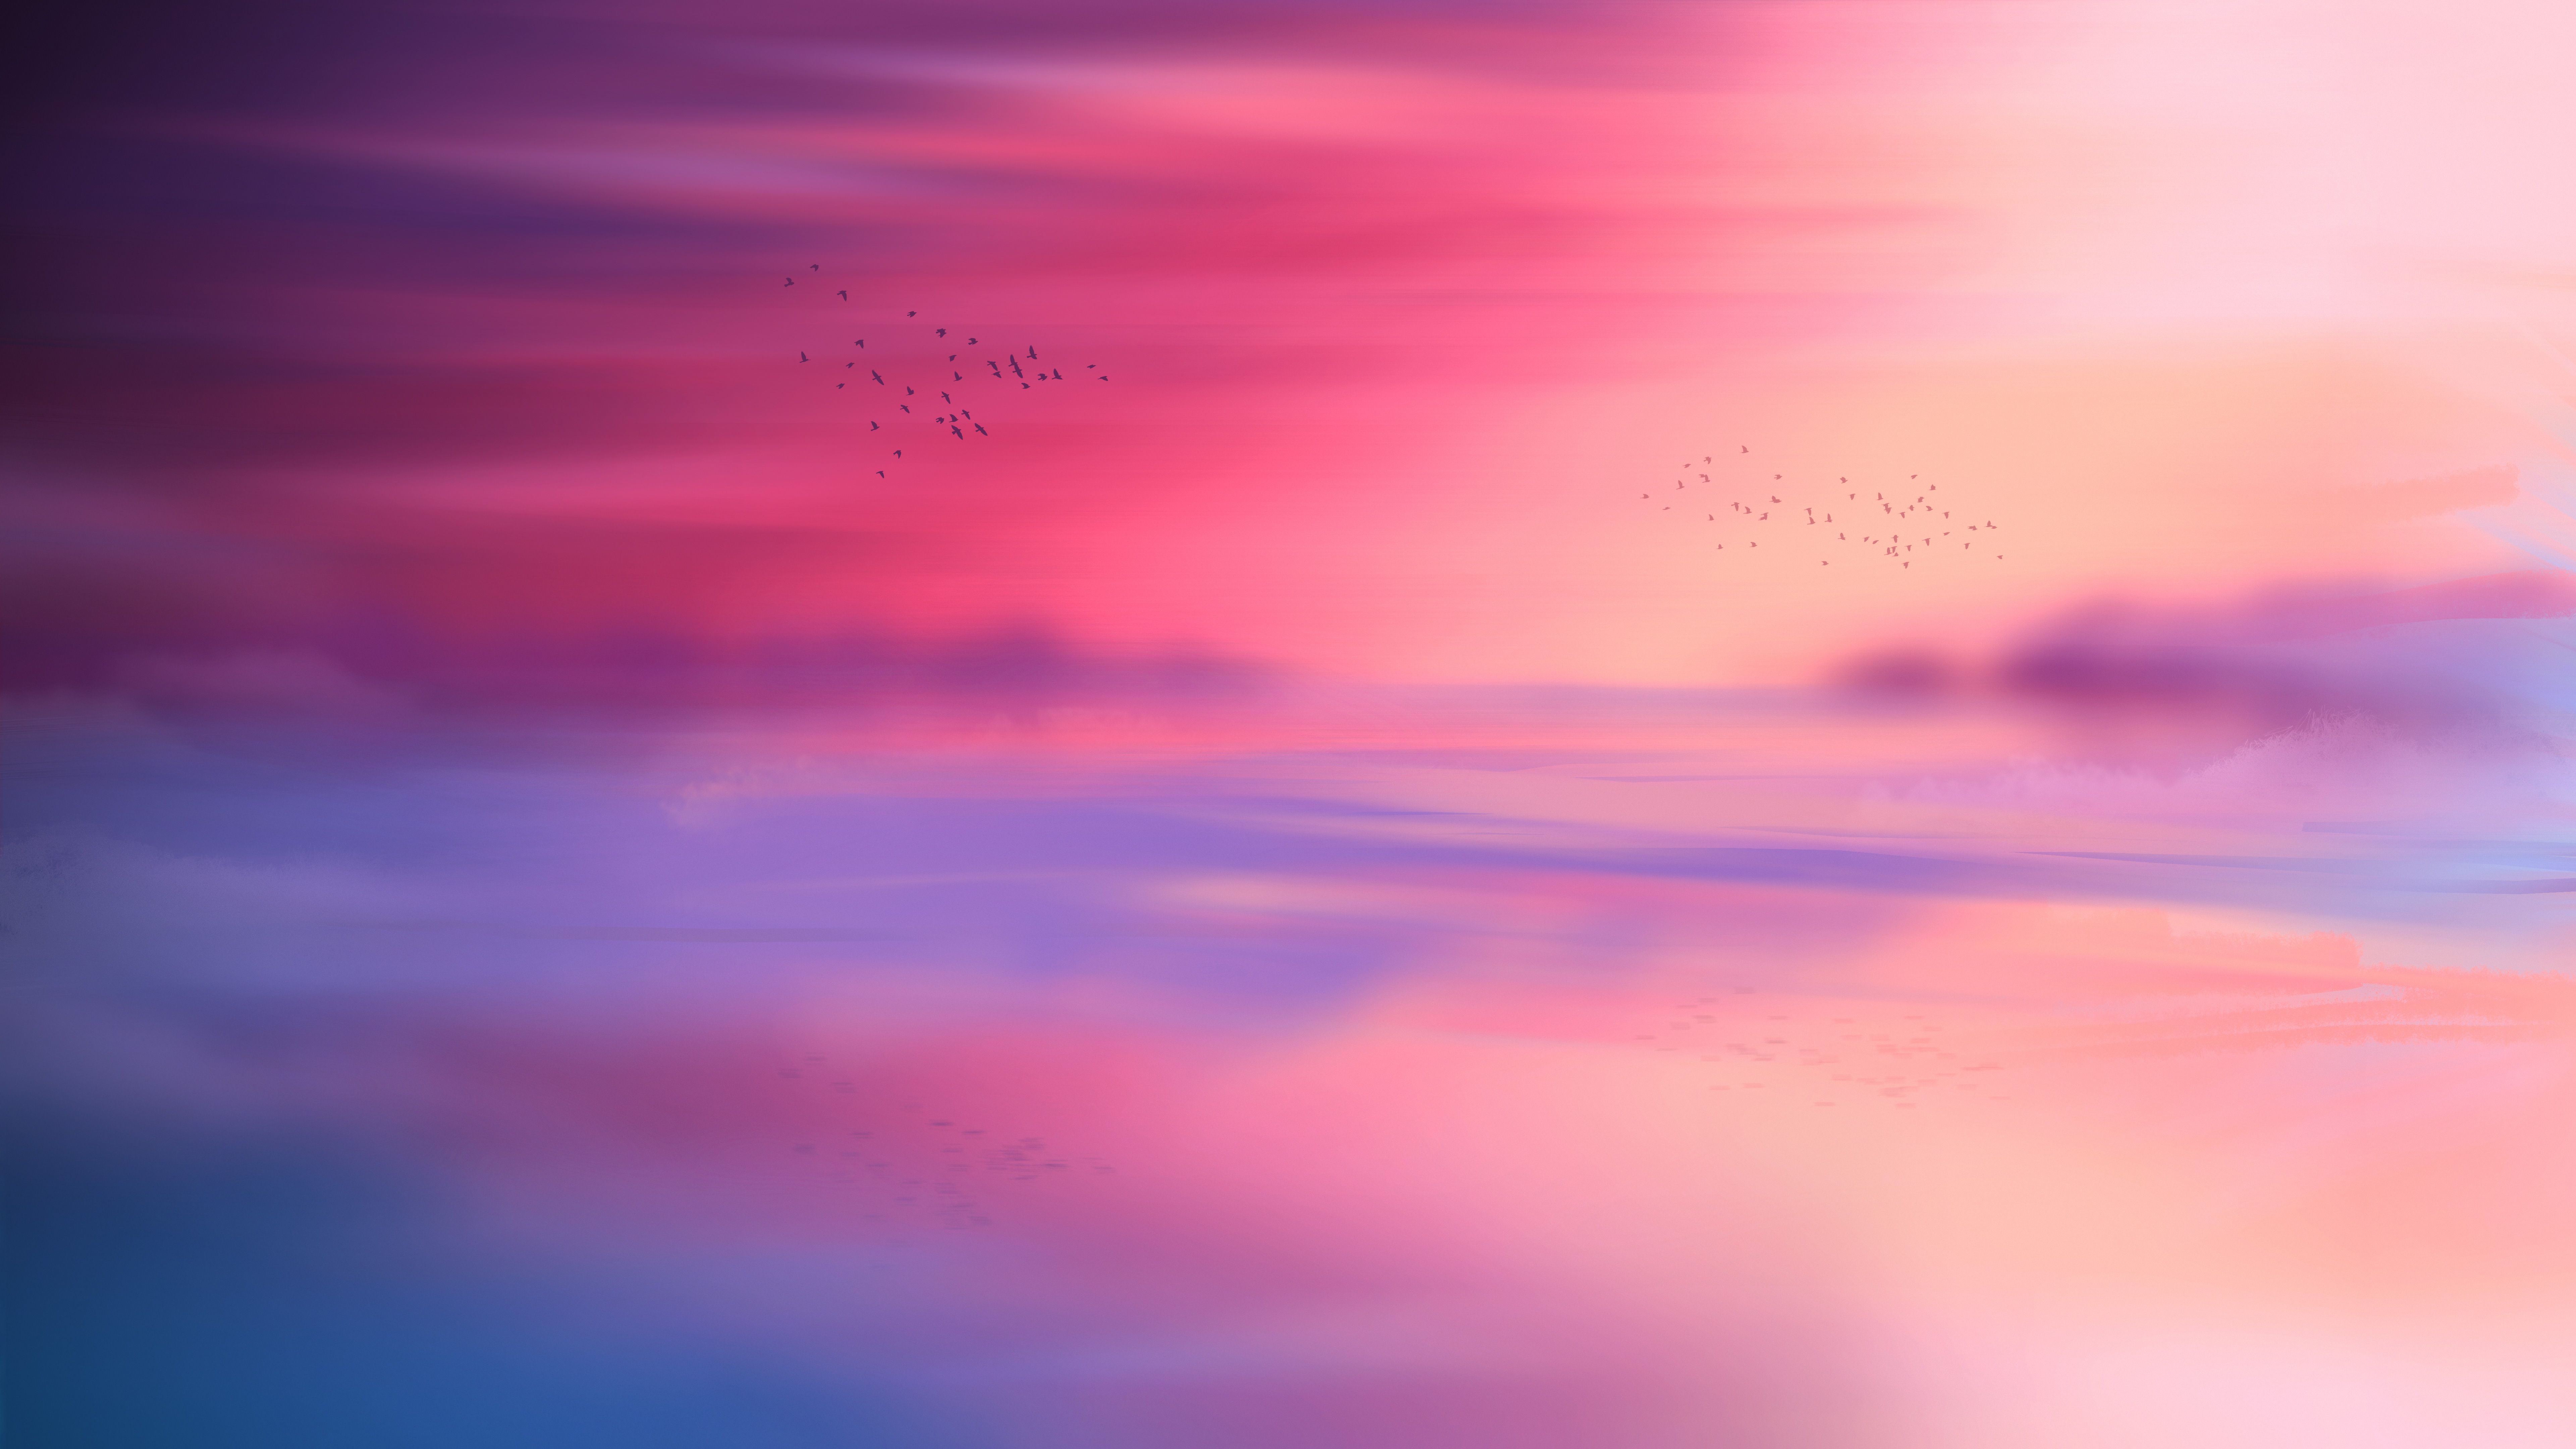 A flock of birds flying over a body of water with a pink and blue sunset in the background. - Sky